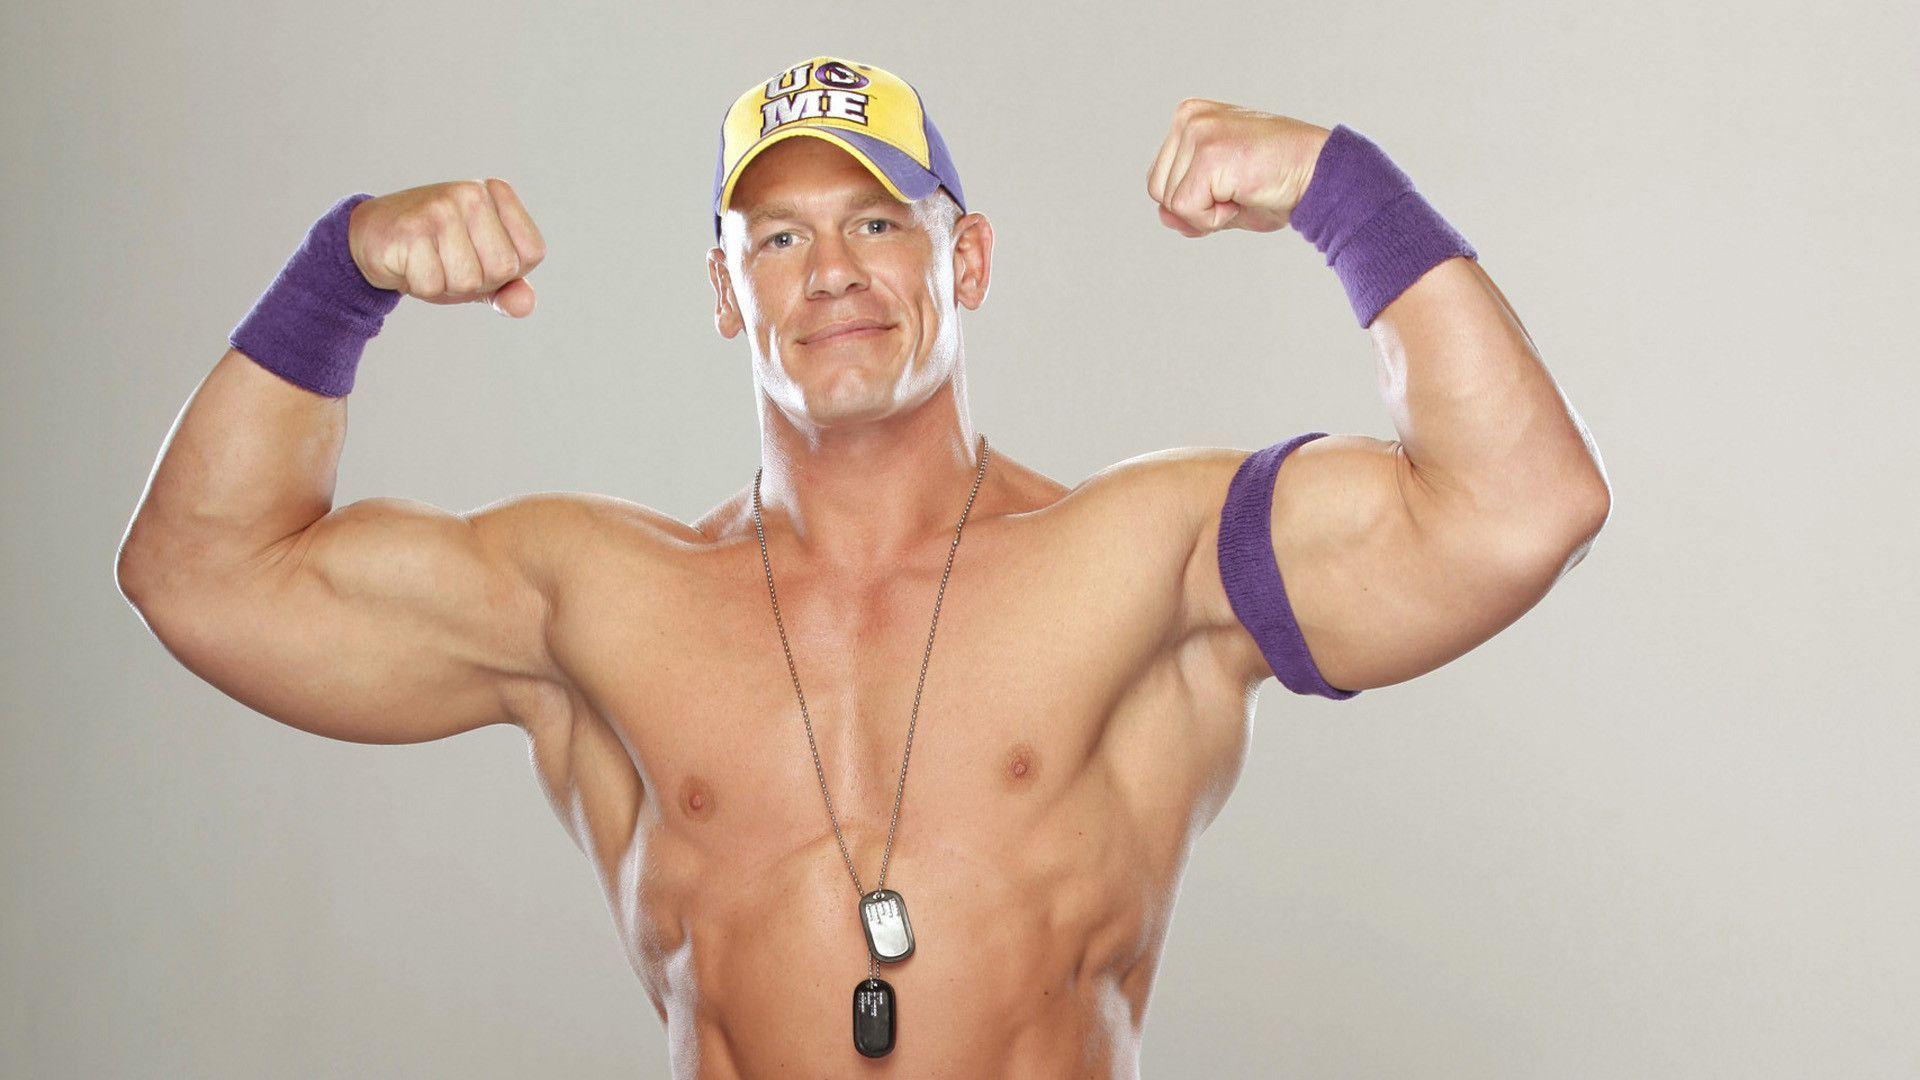 John Cena Wanted In Lead Role For Upcoming Comic Book Movie